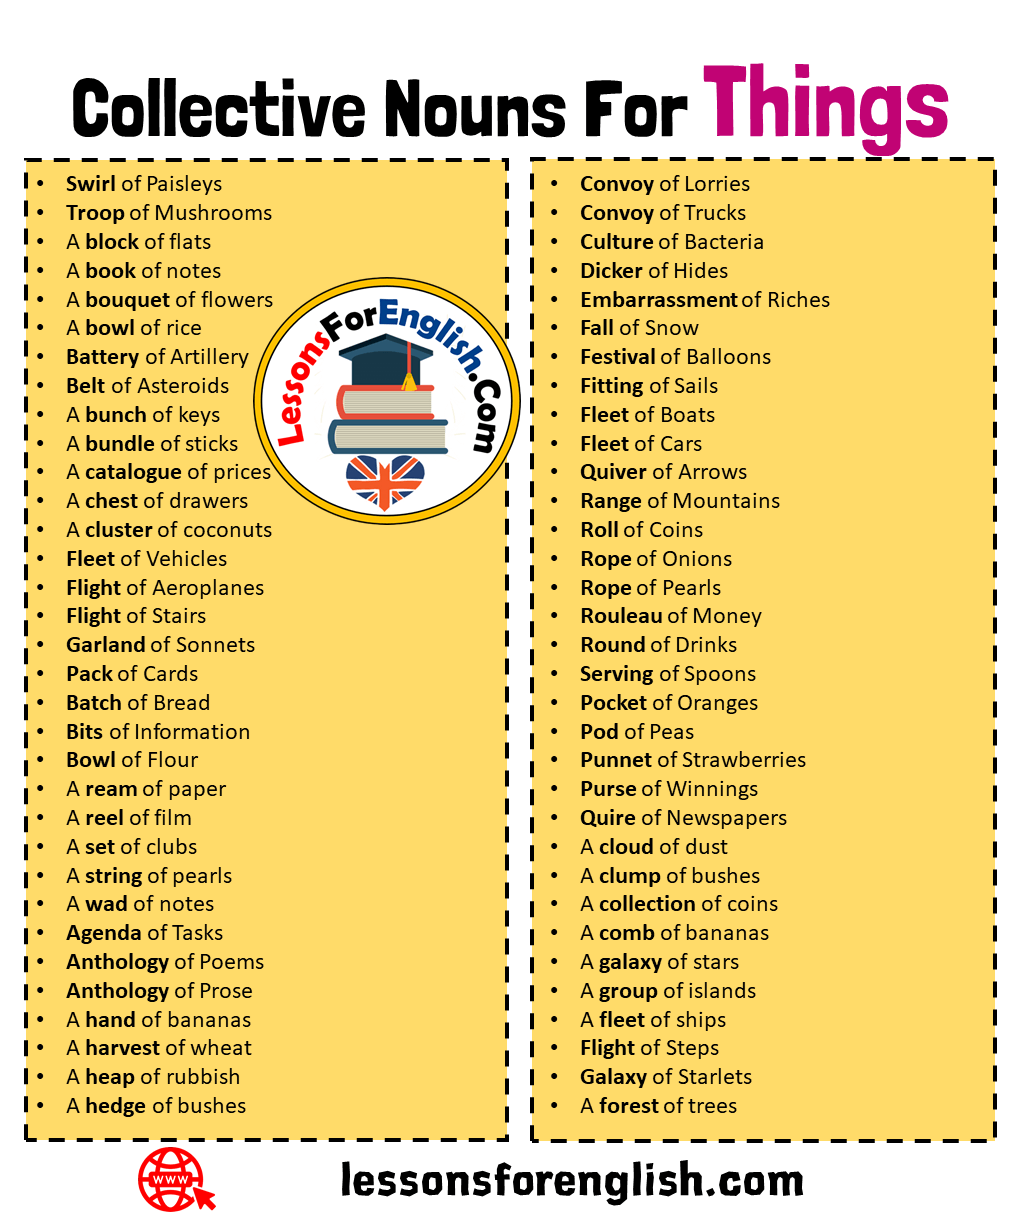 Collective Nouns For Things List in English - Lessons For English